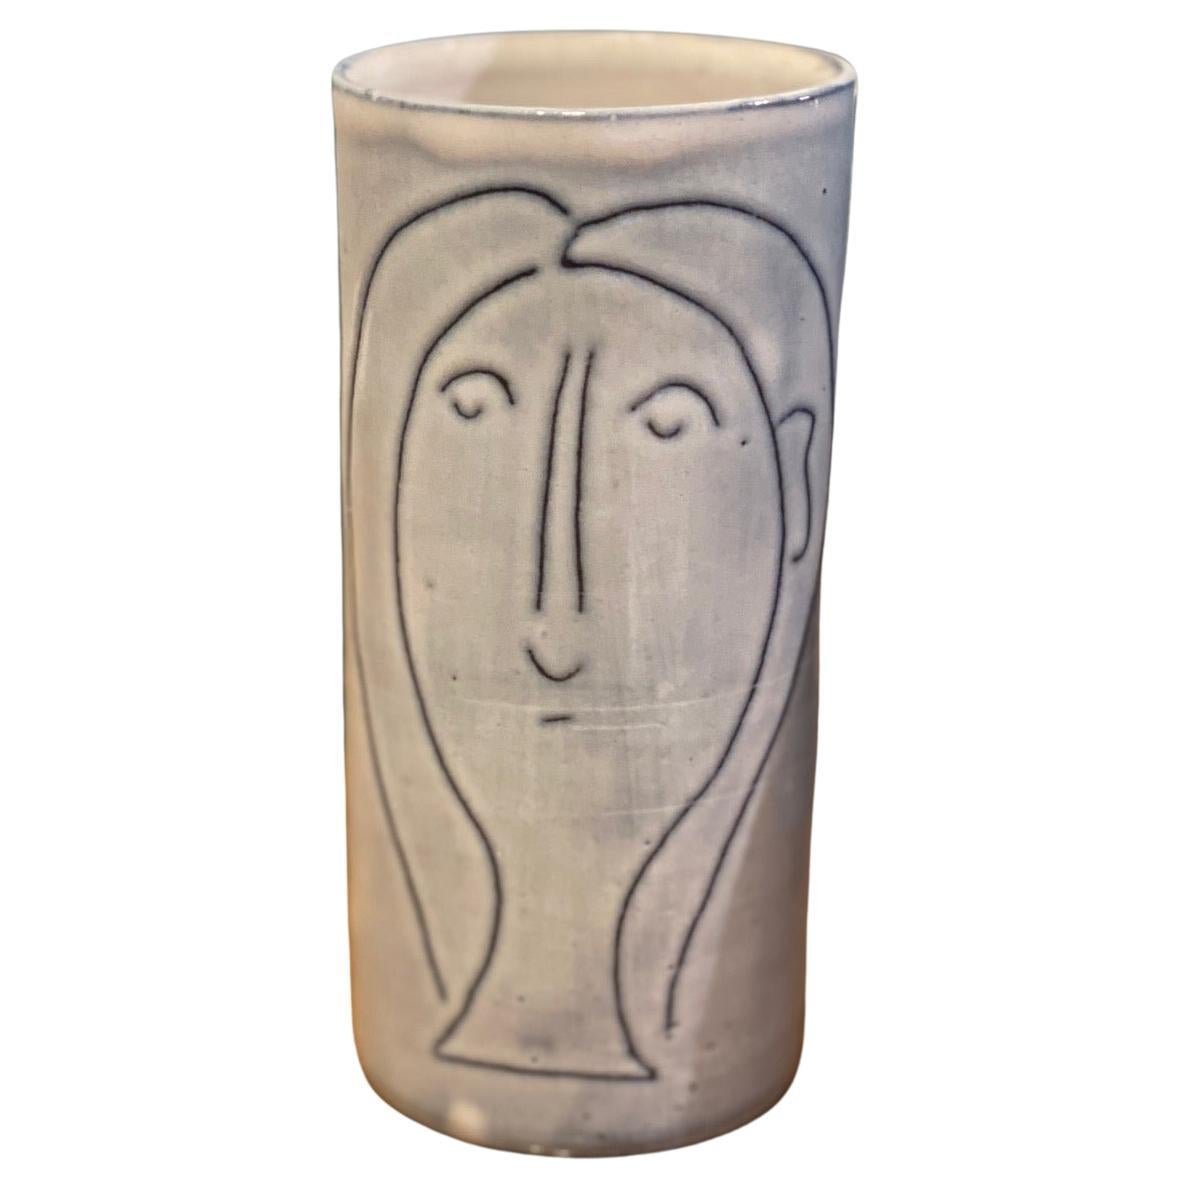 Small Vase with 2 Woman's Faces Signed by Jacques Innocenti, 1950s For Sale